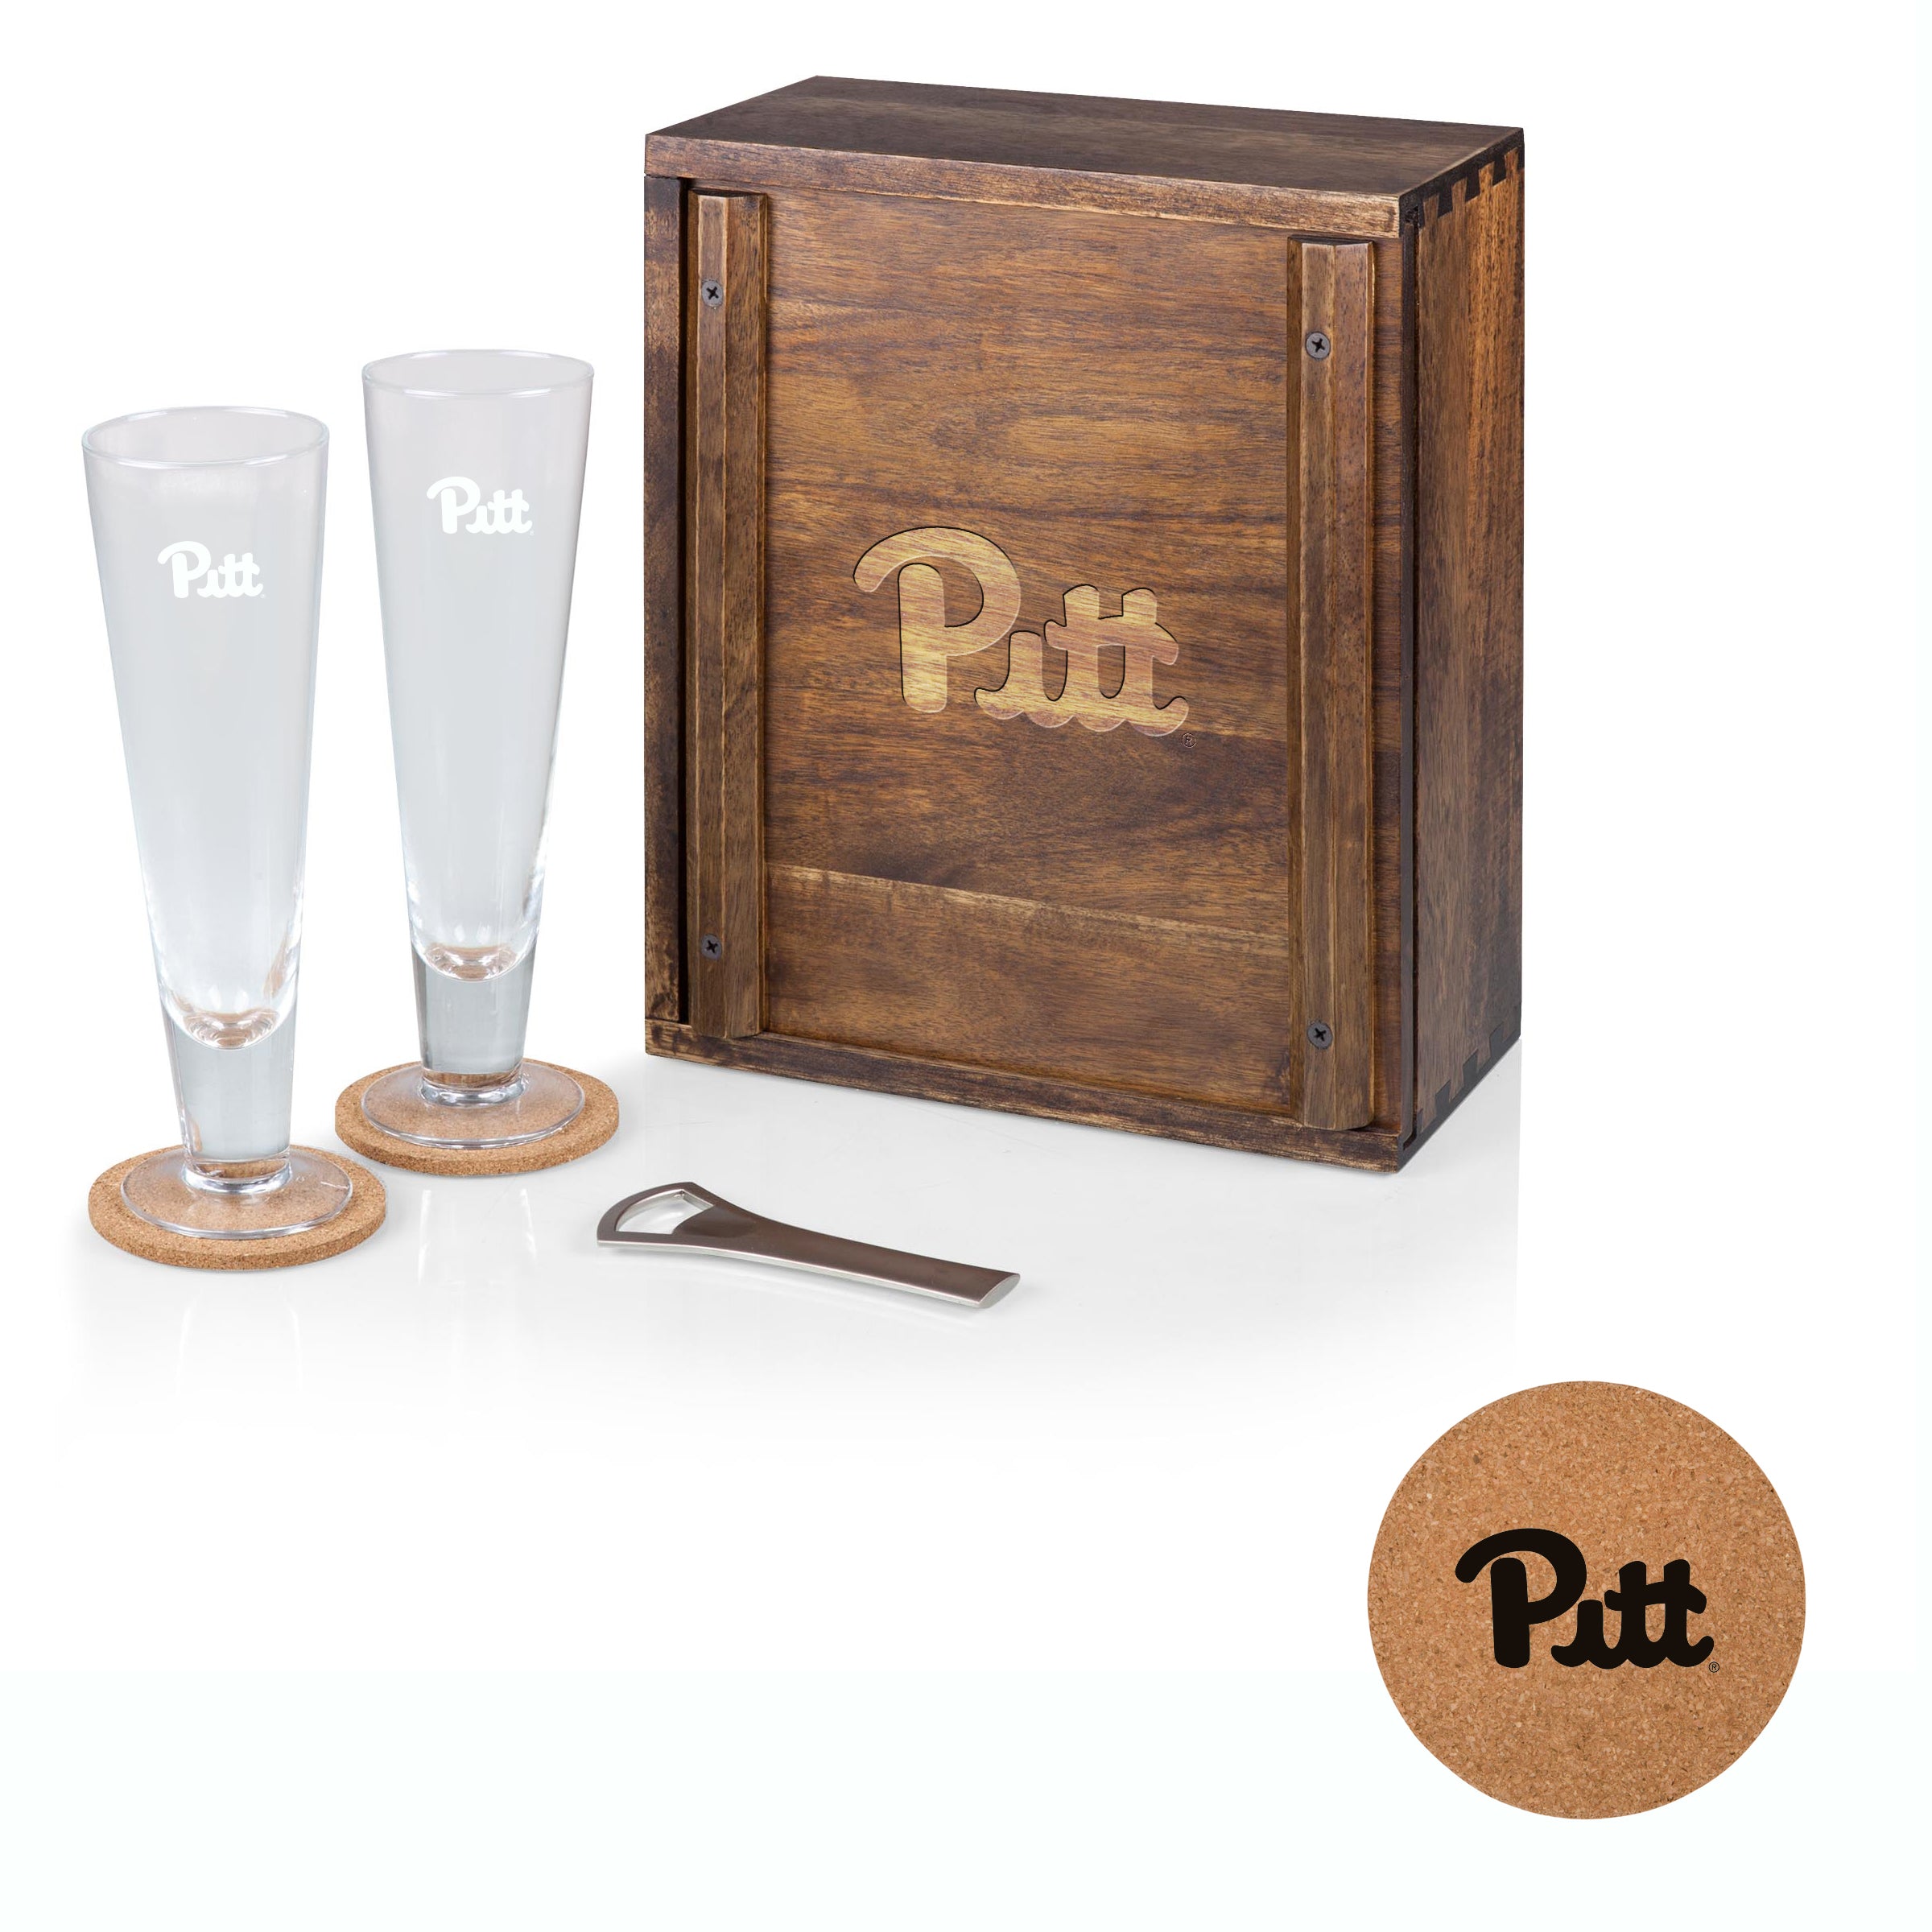 Pittsburgh Panthers - Pilsner Beer Glass Gift Set